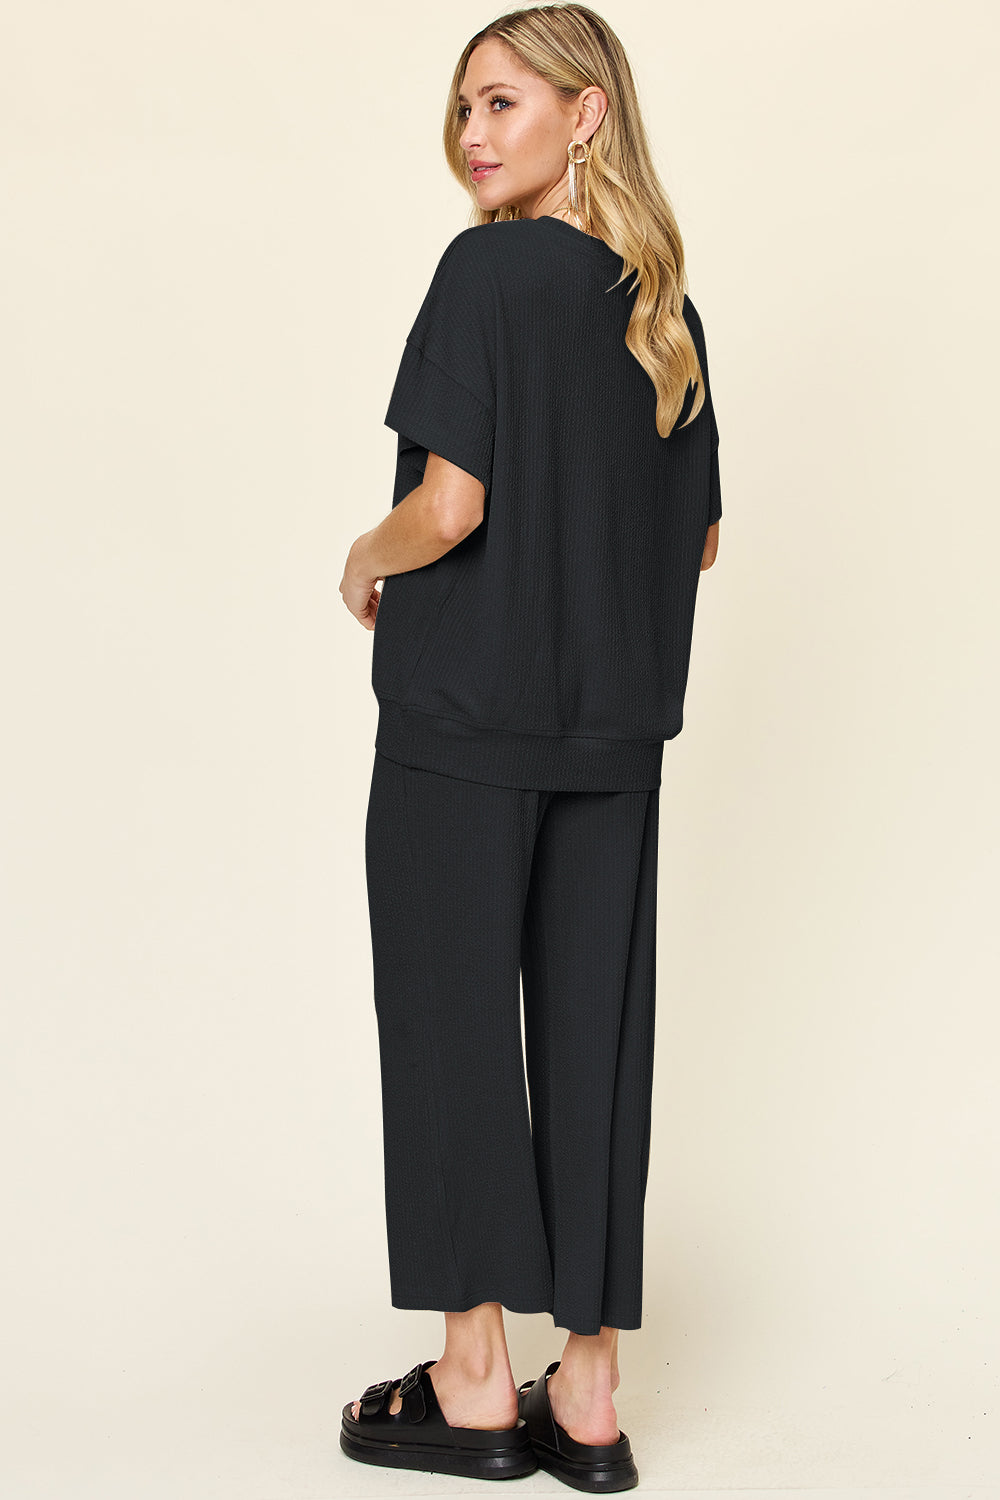 Double Take Texture Round Neck Short Sleeve T-Shirt and Wide Leg Pants